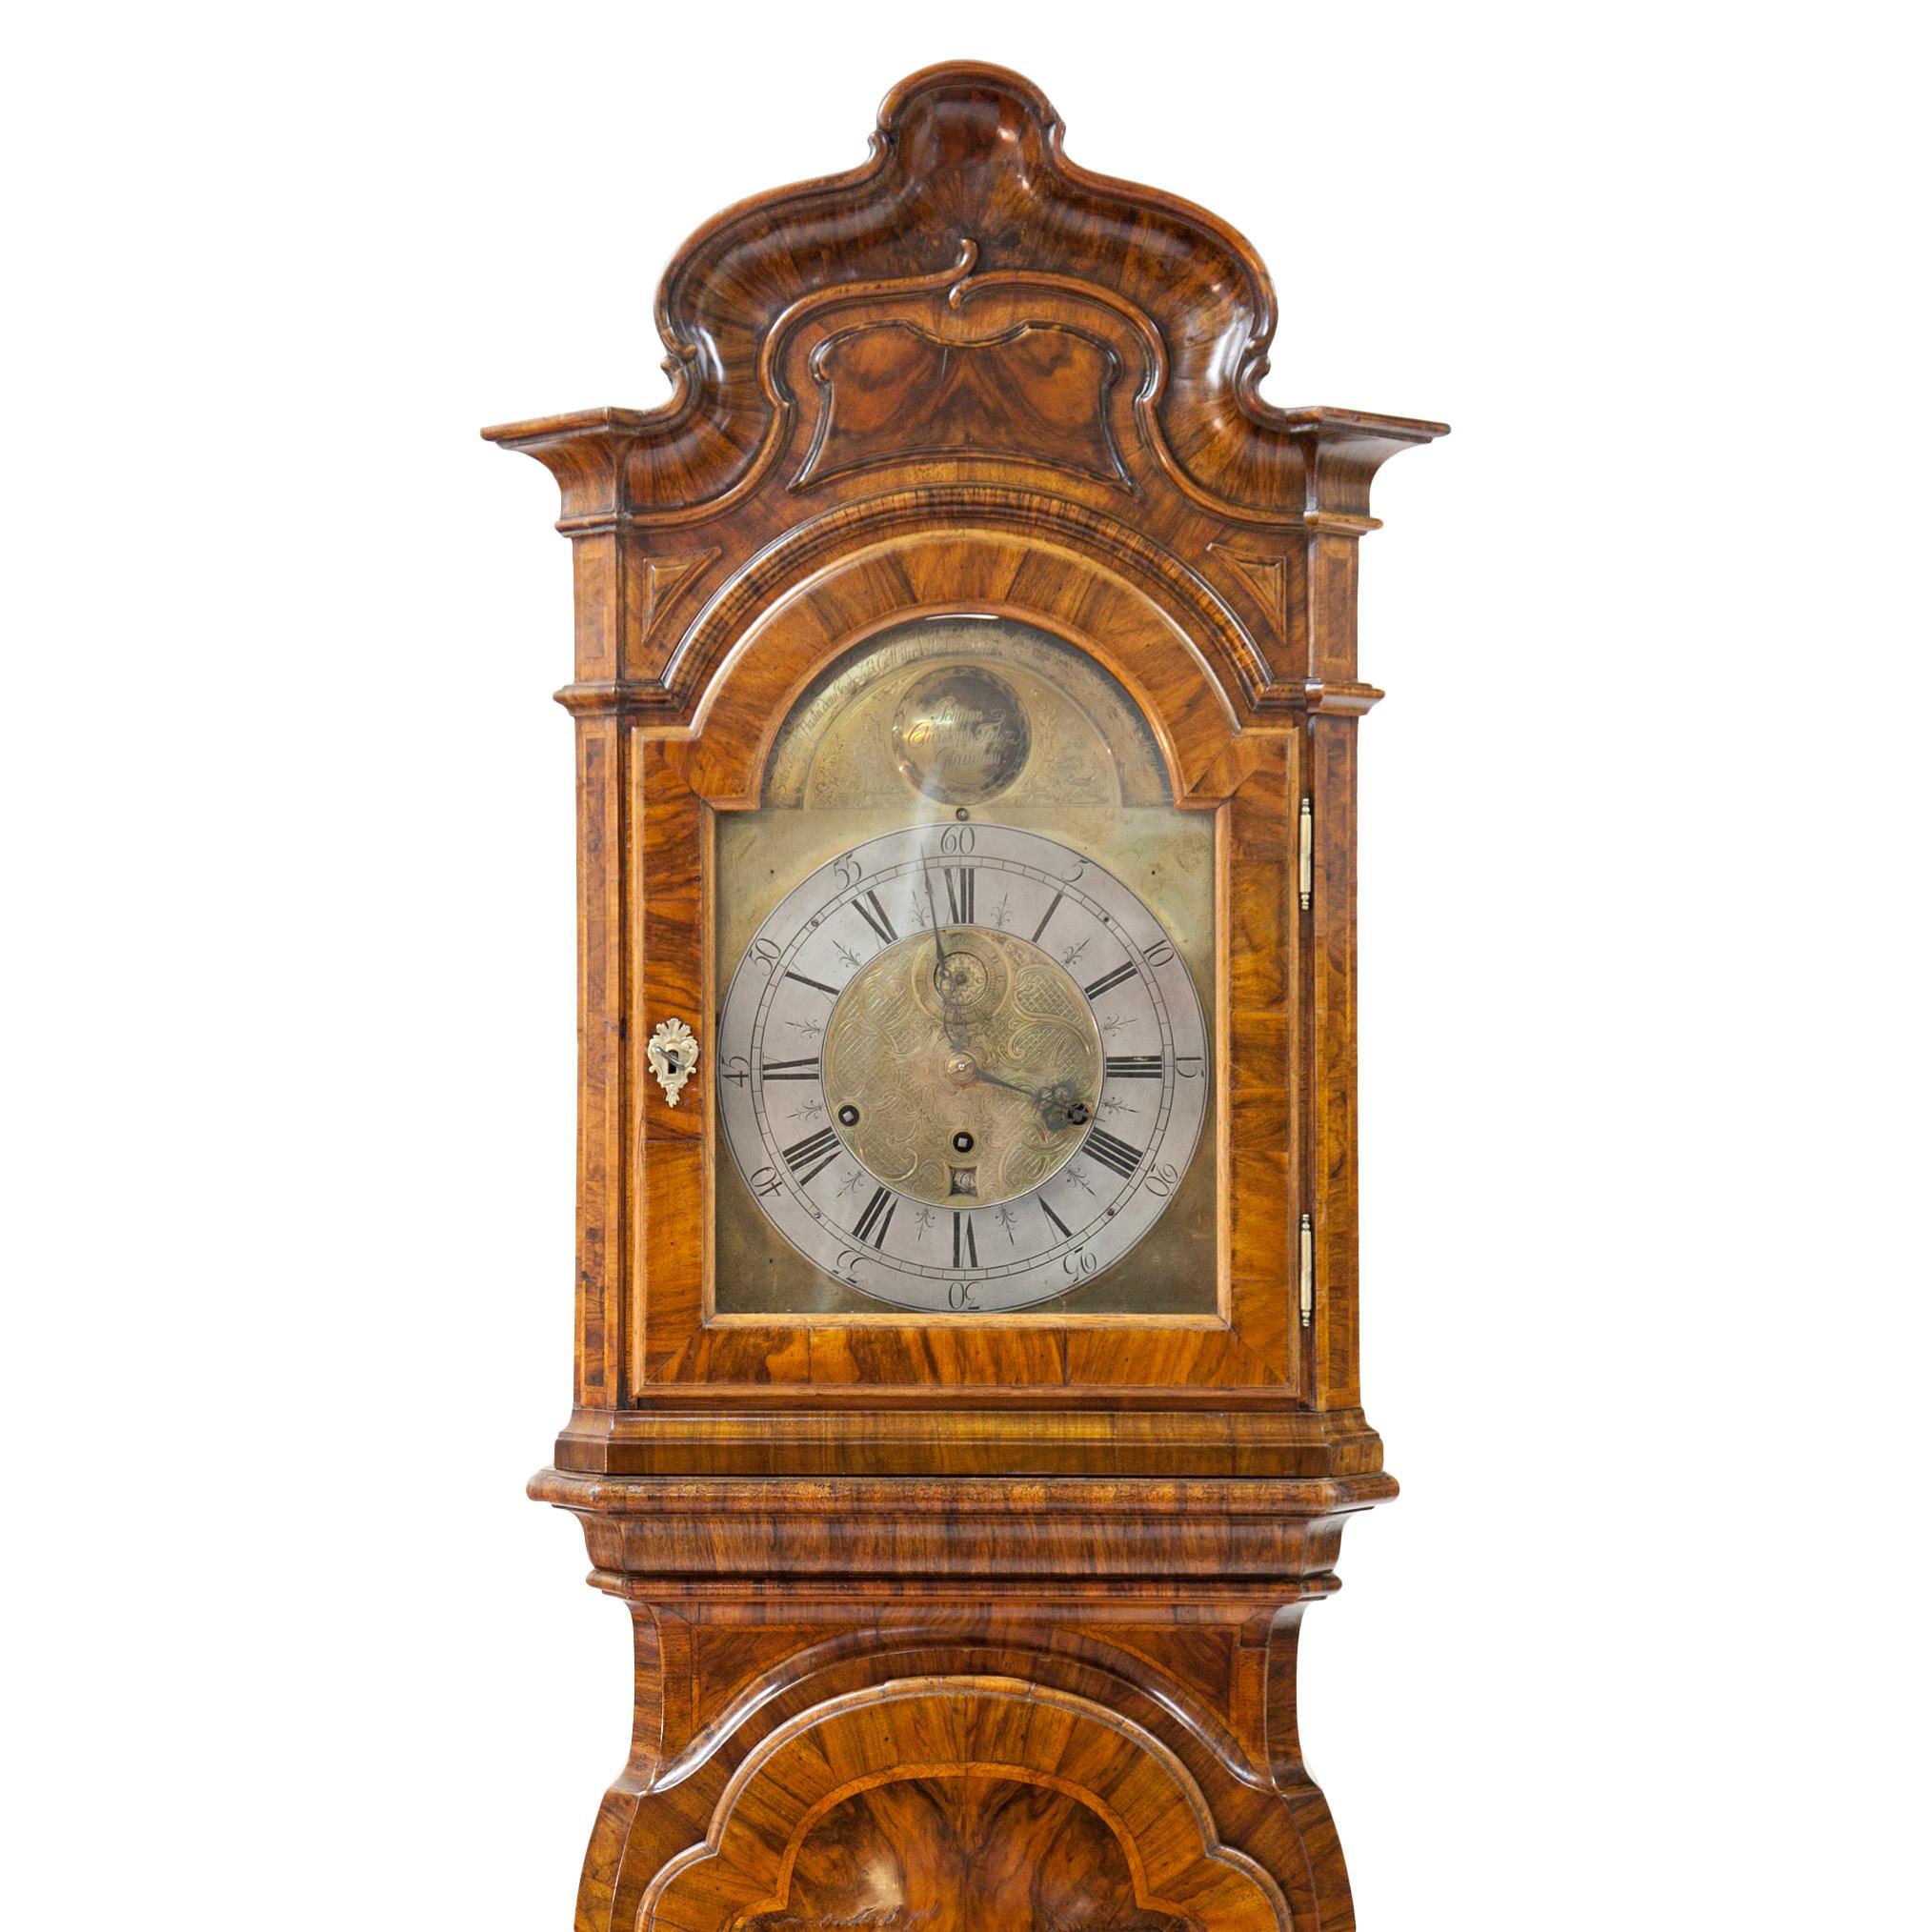 Large baroque grandfather clock in walnut veneered, with a curvy base and a trapezoidal pendulum case. The top part shows a wavy cornice, one glazed door and lateral carved fillings in black. The door with a quatrefoil pendulum window. The clock